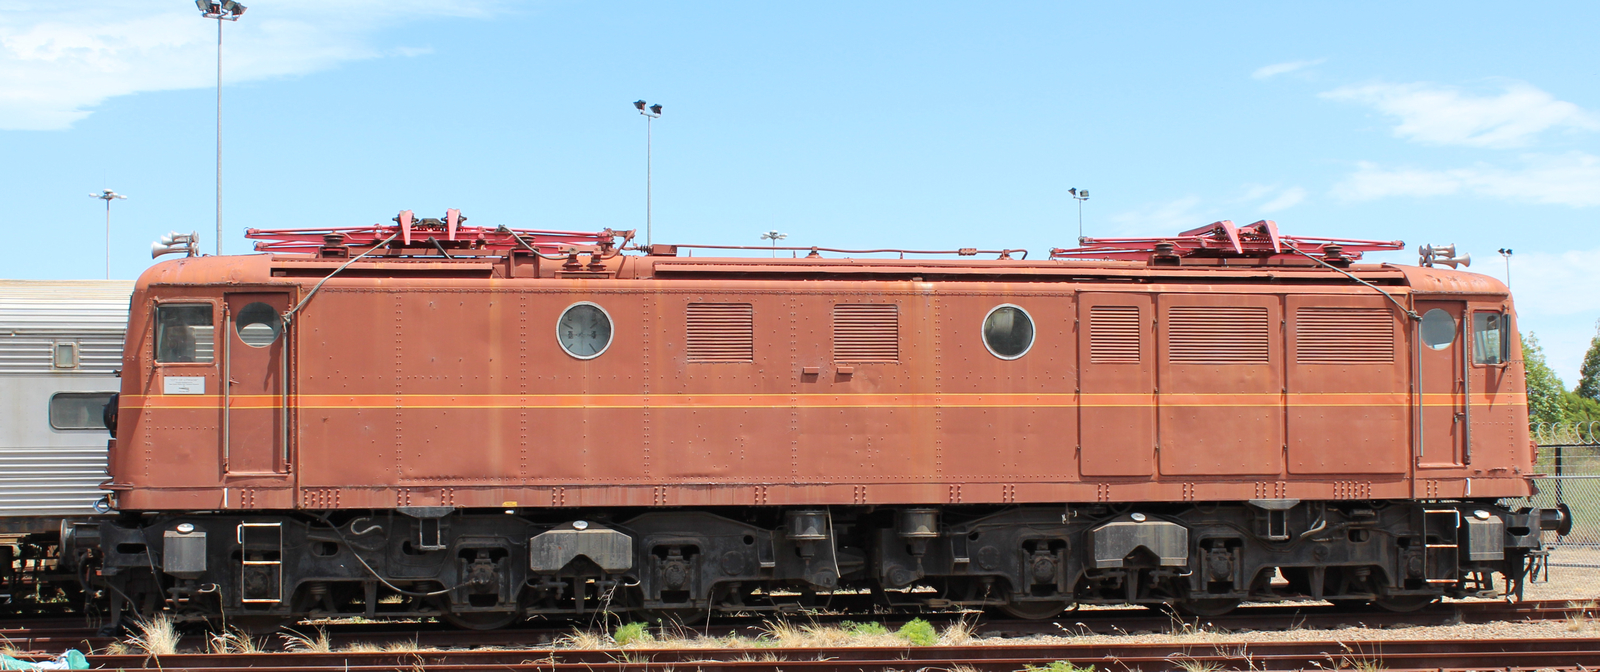 No. 4638 parked at the Broadmeadow turntable in January 2013